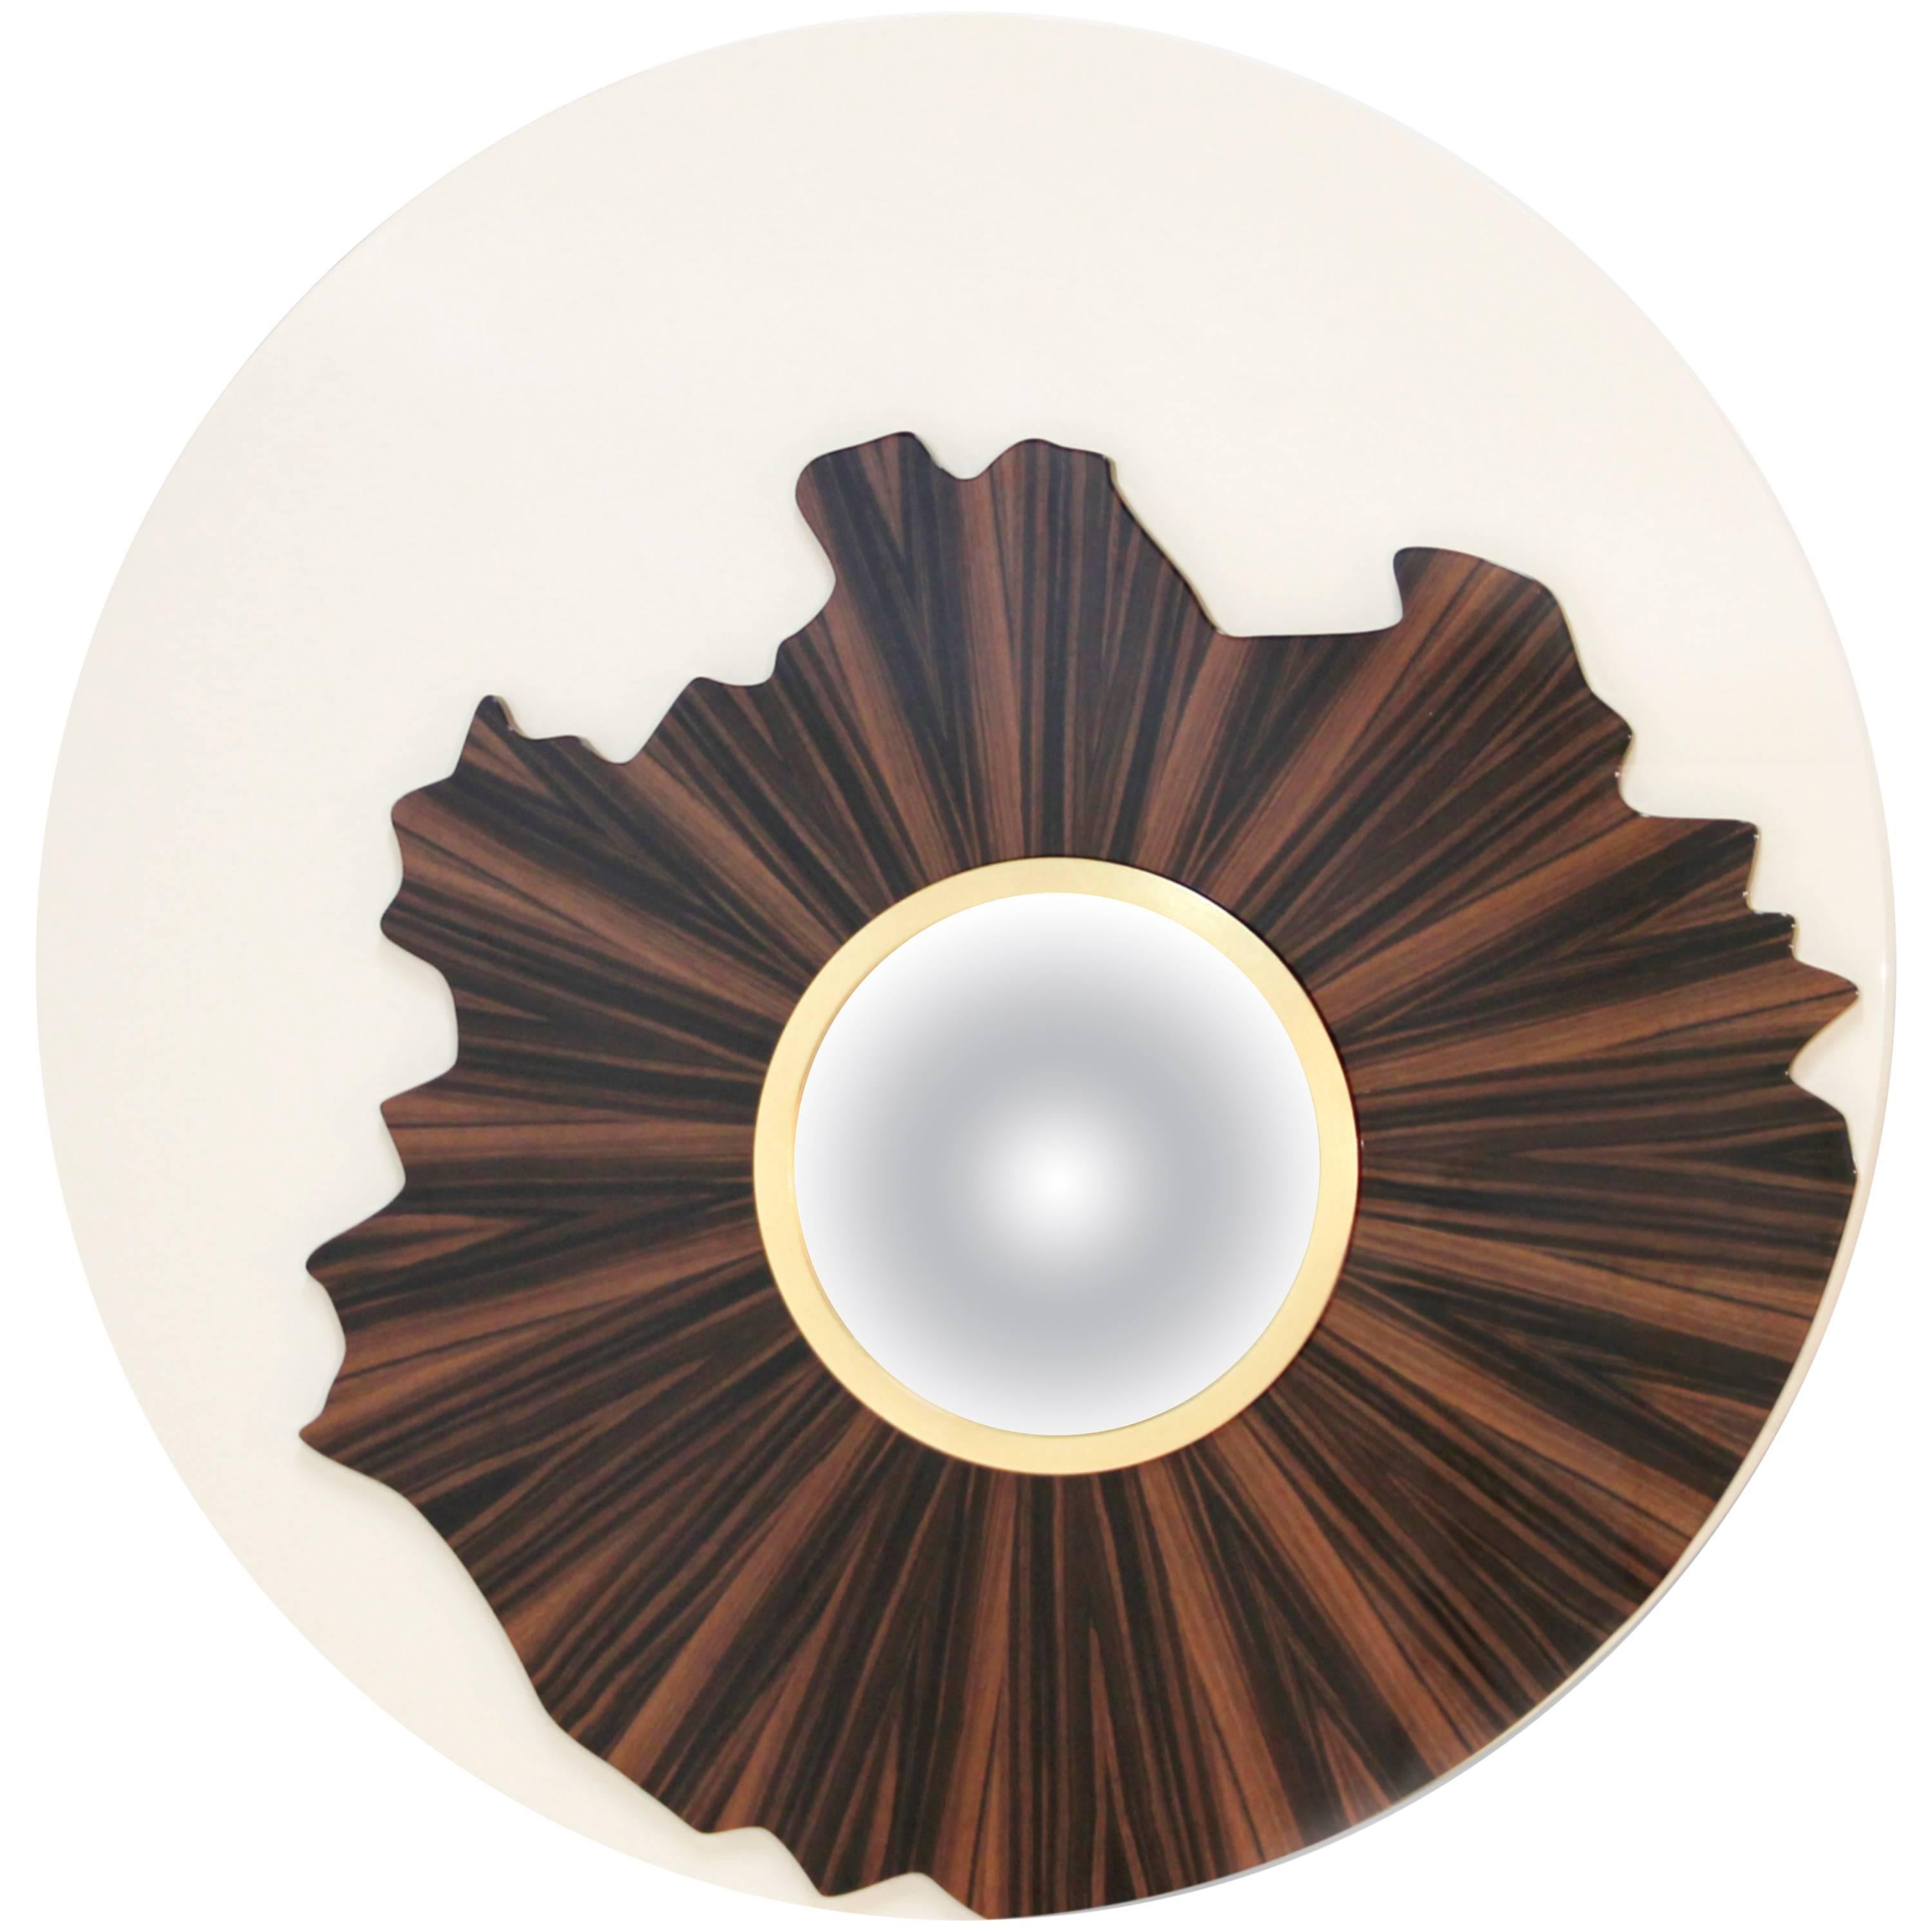 Brabbu Large Round Modern Timber and Gold and lacquer Wall Convex mirror  